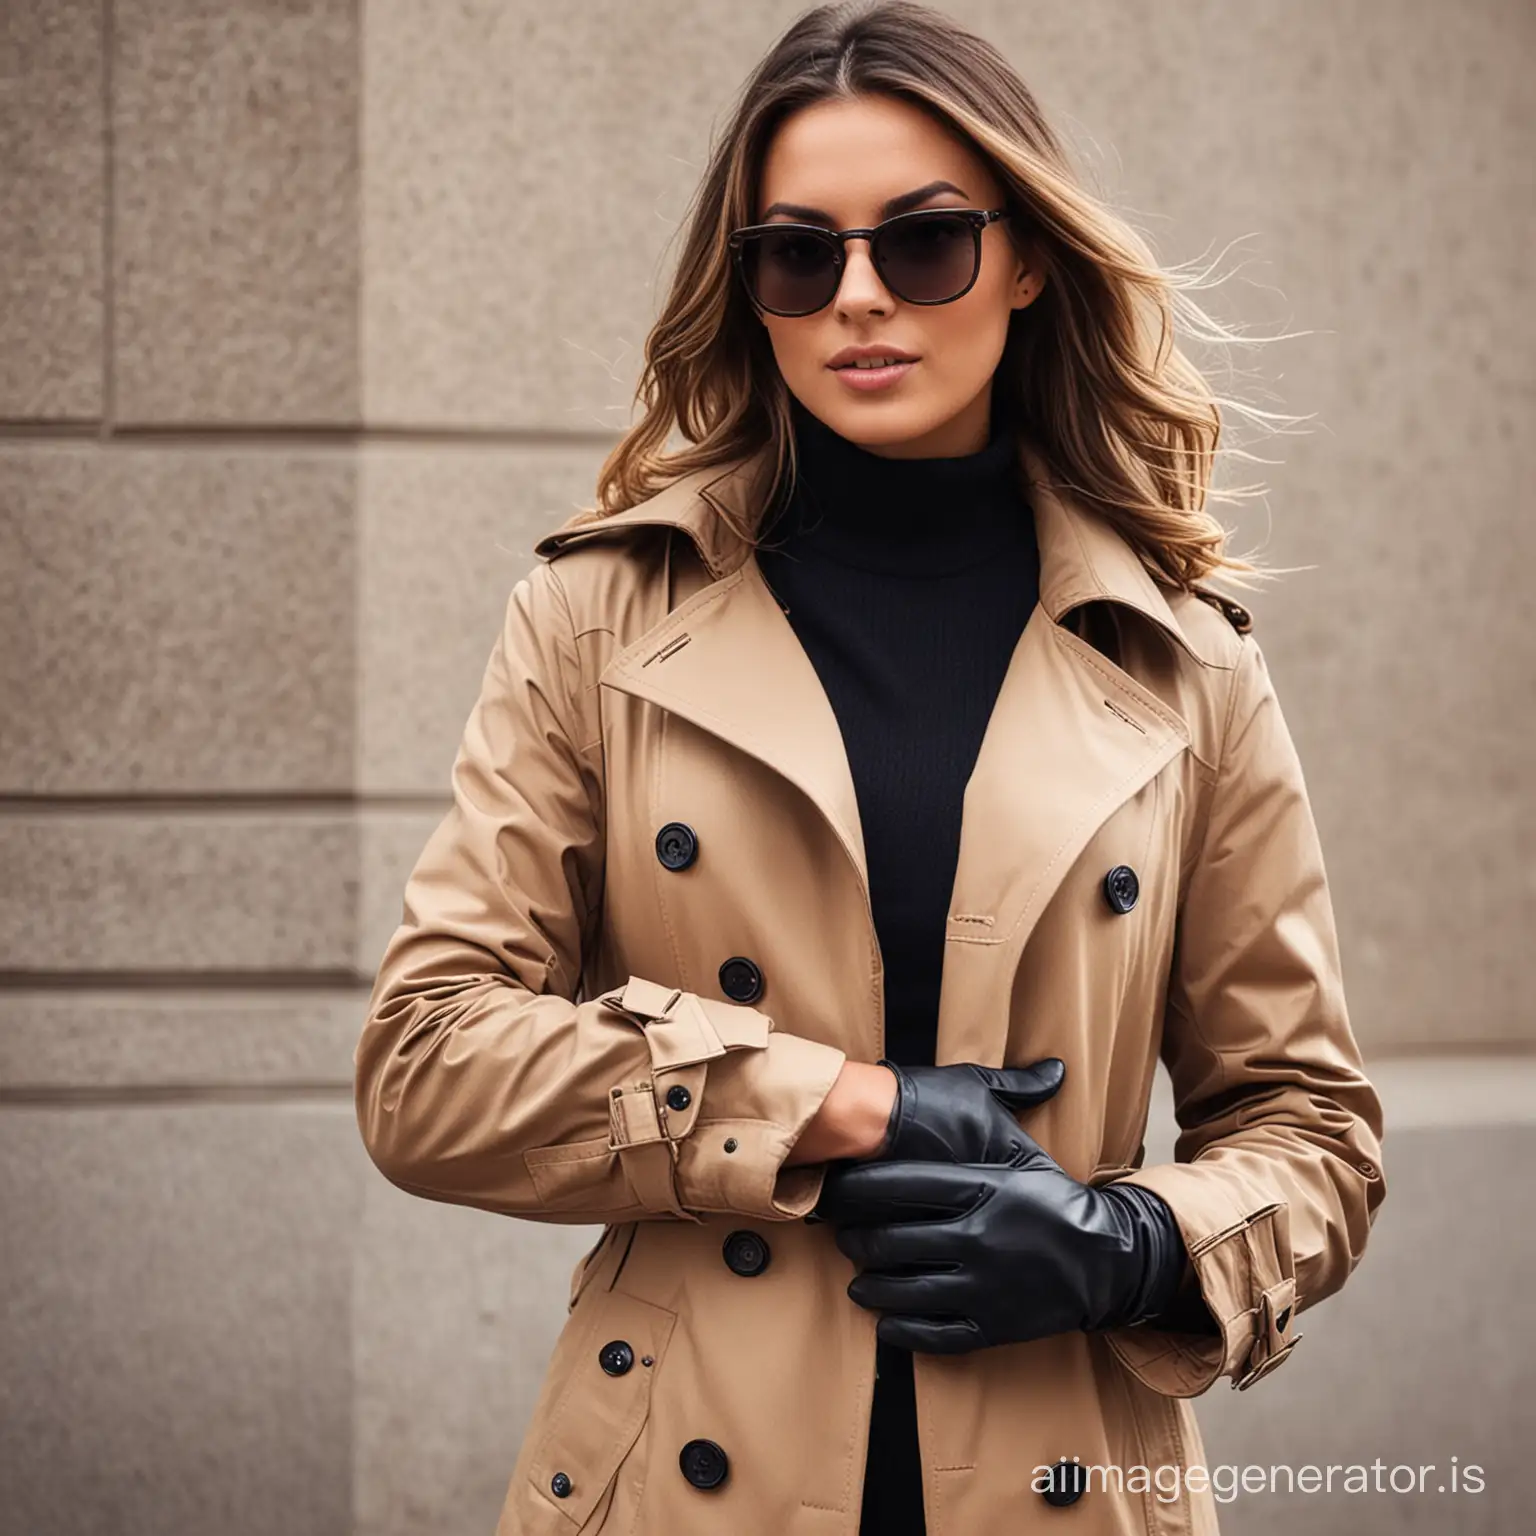 Fashionable-Woman-in-Trench-Coat-with-Leather-Gloves-and-Sunglasses